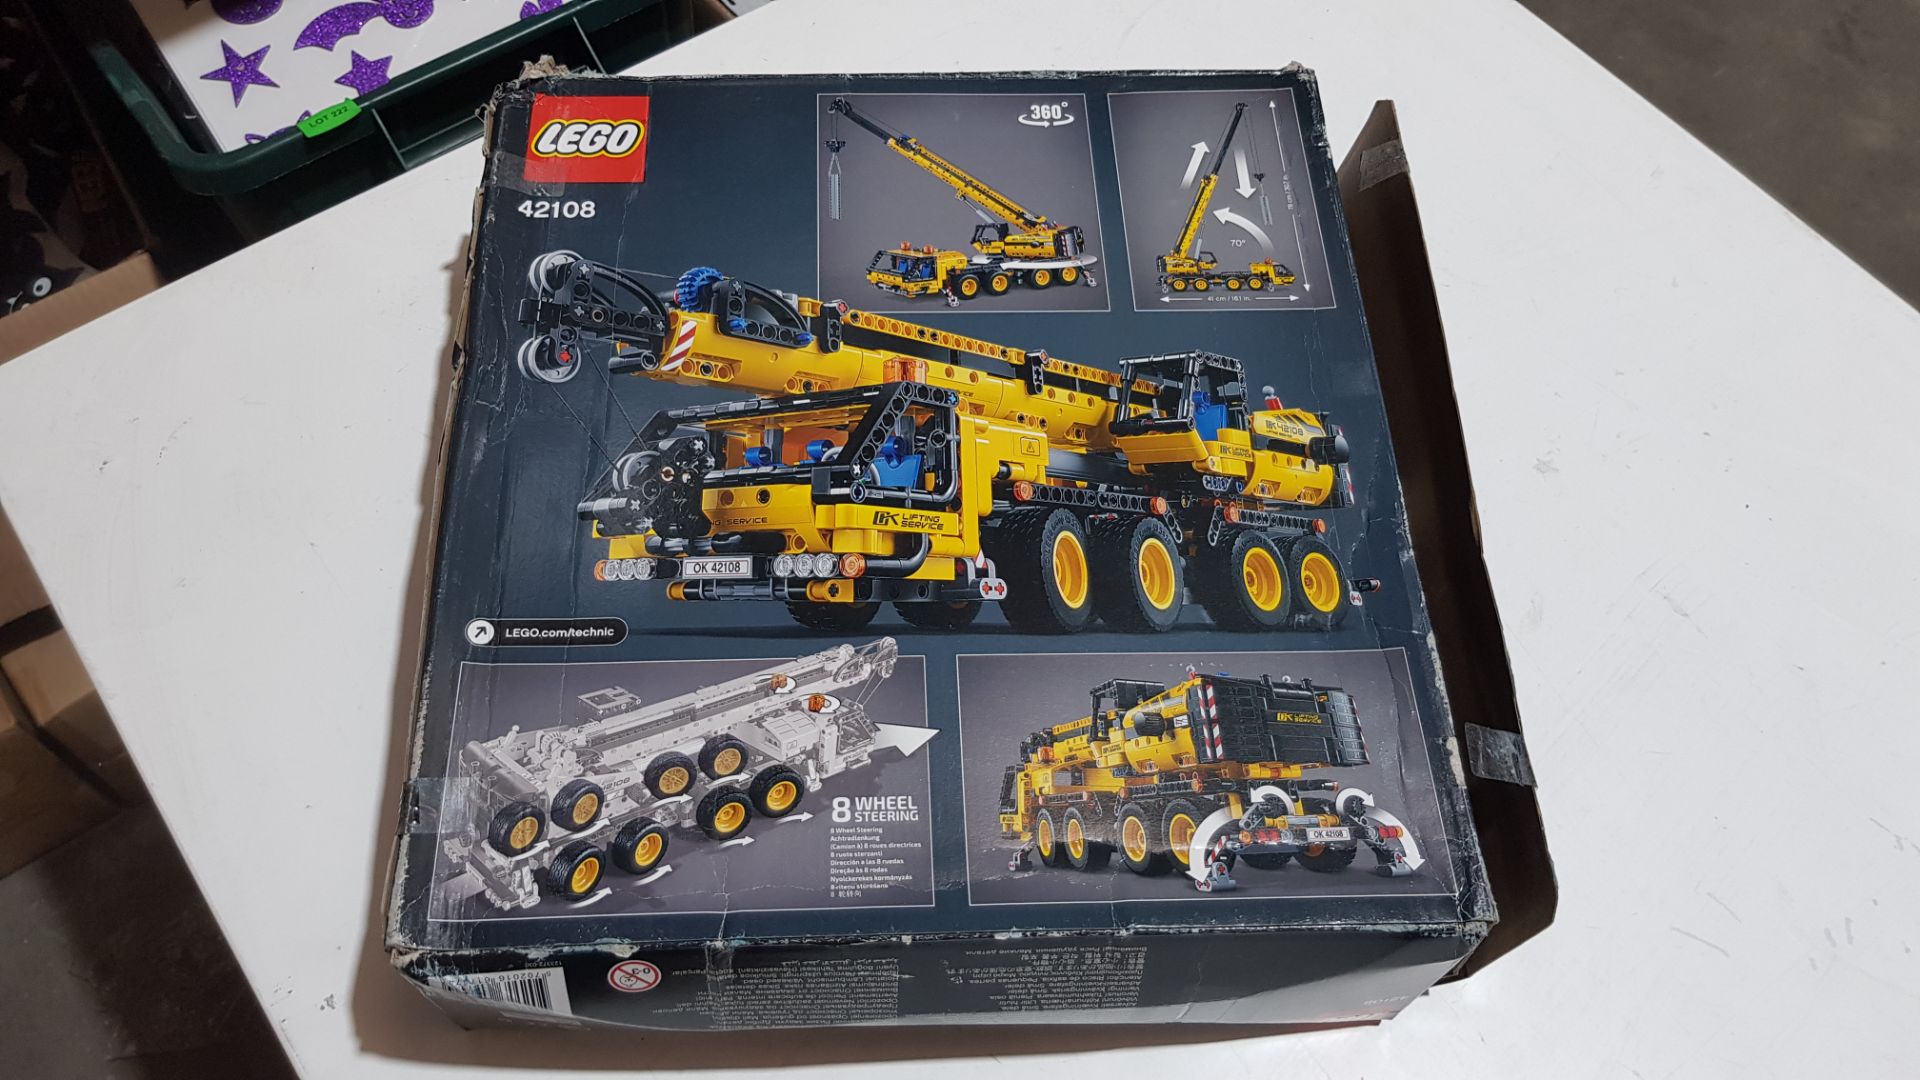 (R6A) Toys. 1 X Lego Technic Mobile Crane 42108 (Appears Complete). RRP £89.99 - Image 3 of 5